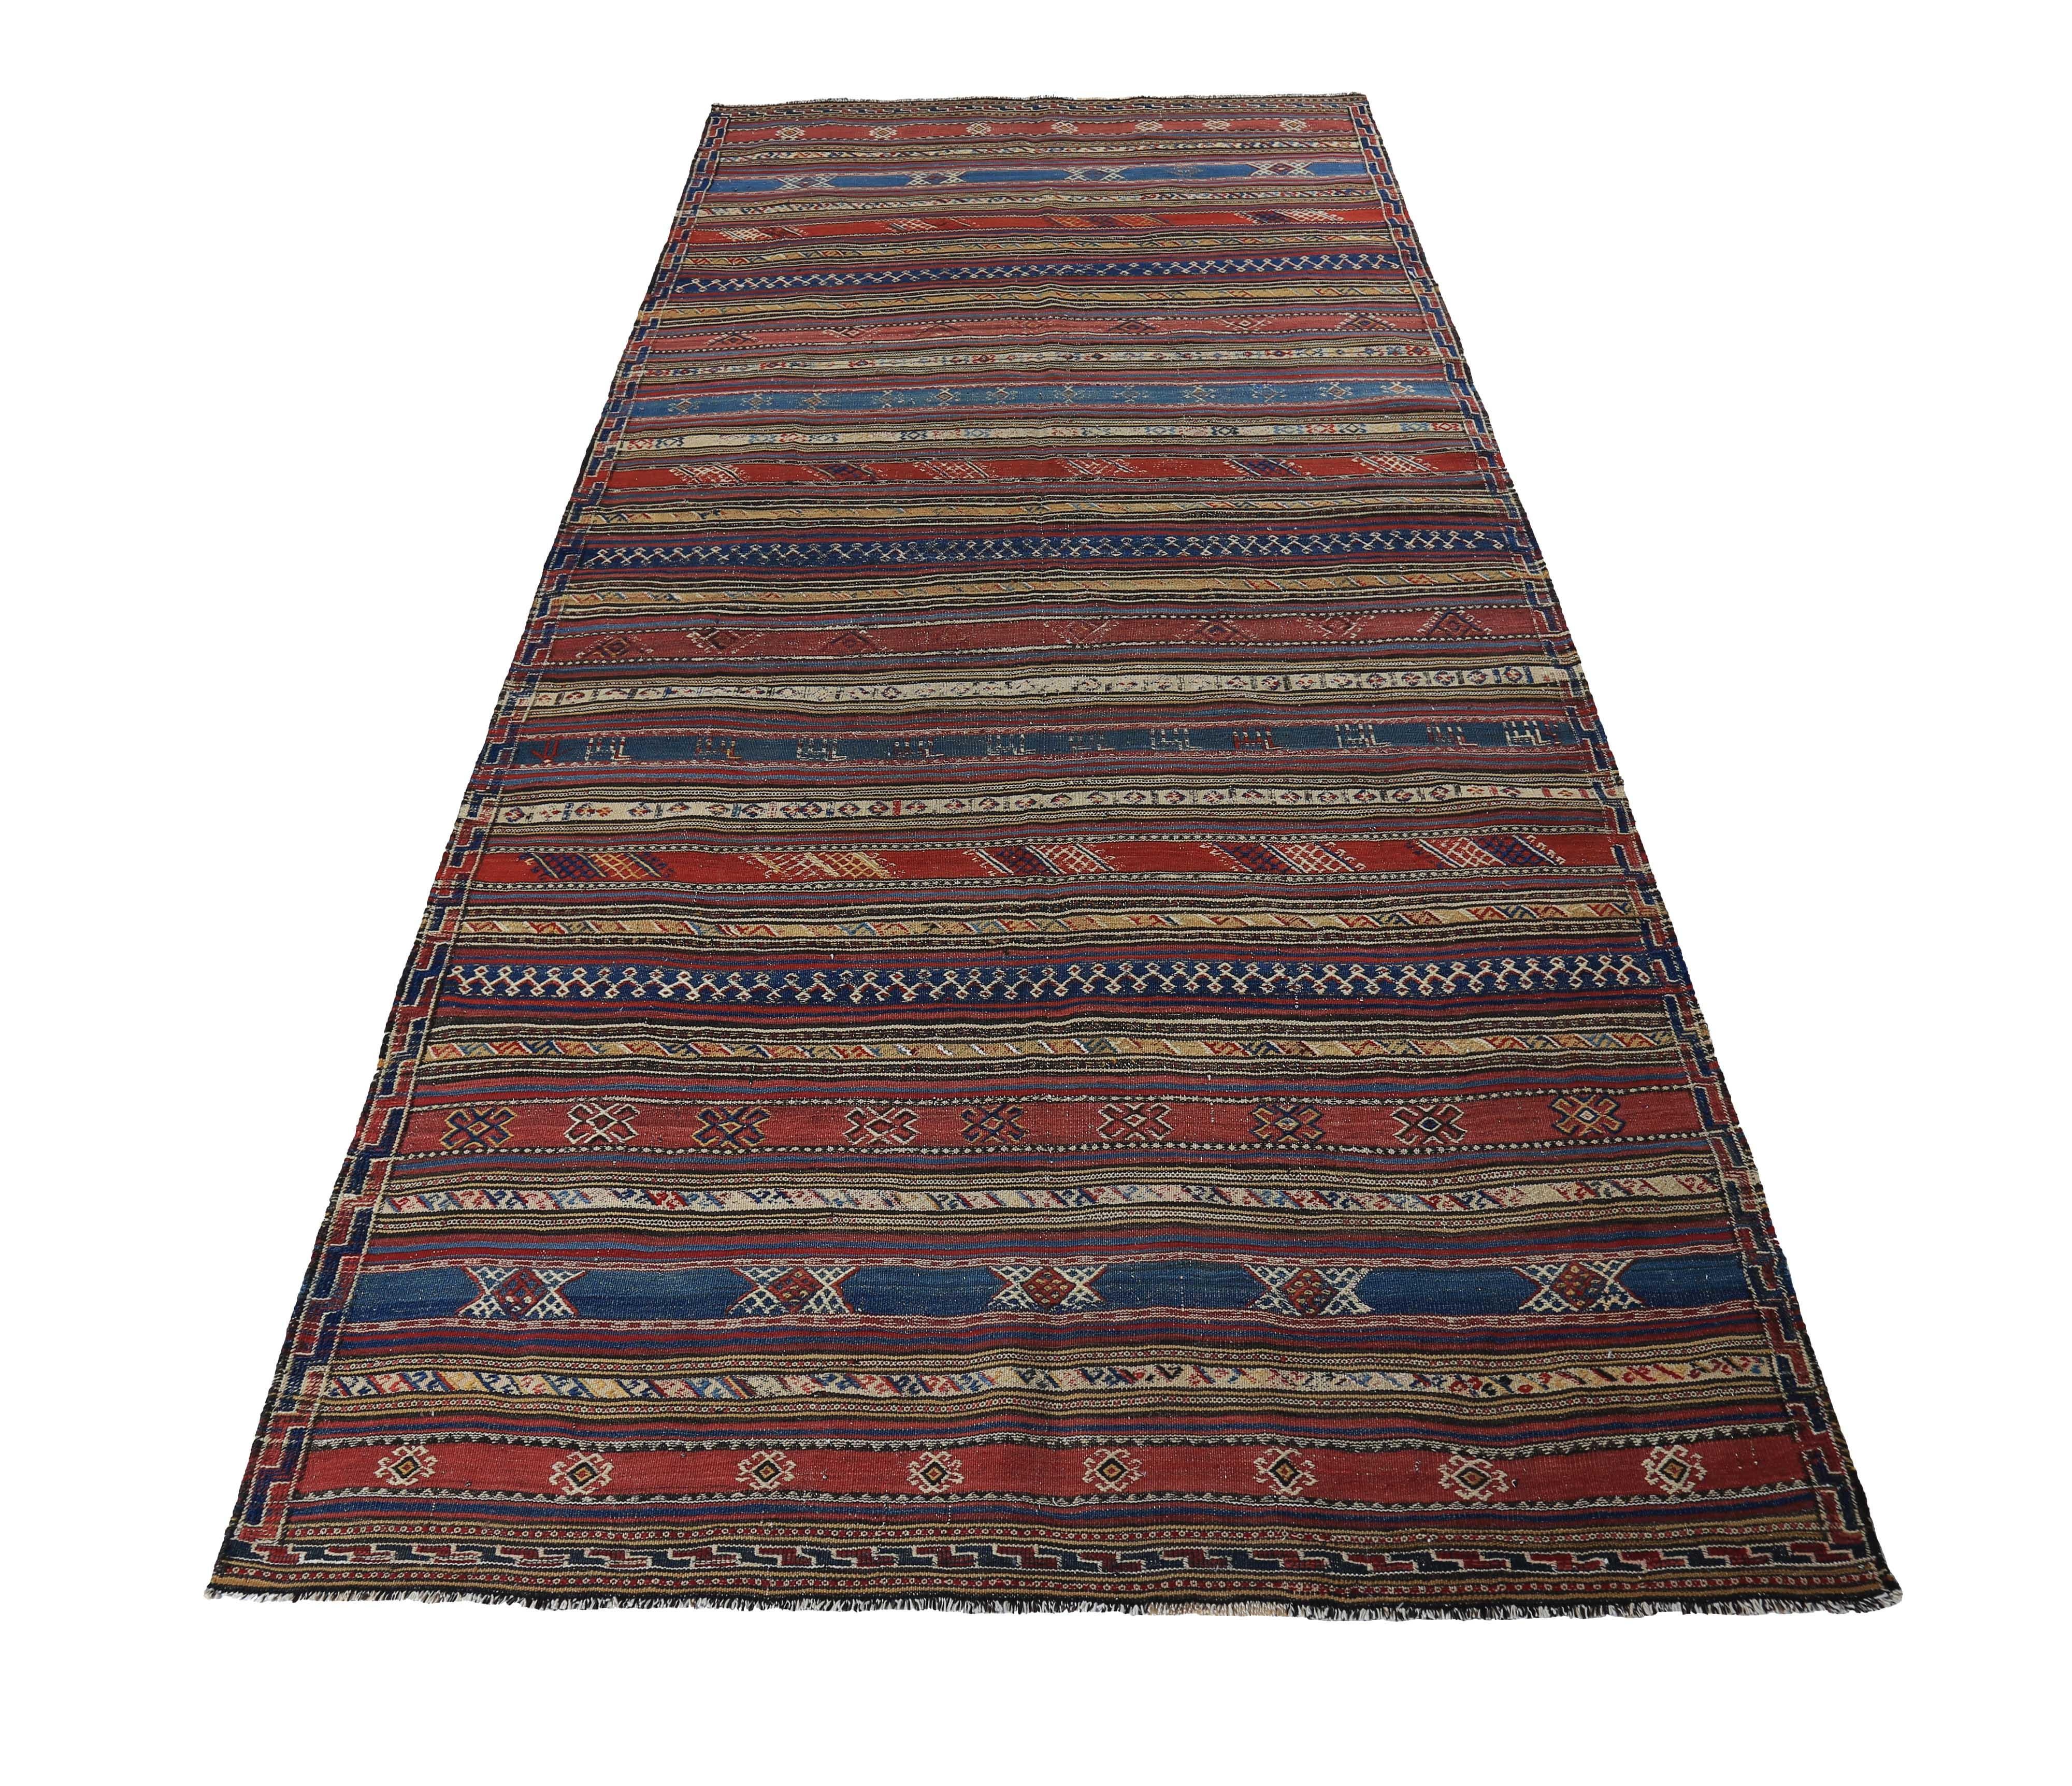 Turkish rug handwoven from the finest sheep’s wool and colored with all-natural vegetable dyes that are safe for humans and pets. It’s a traditional Kilim flat-weave design featuring navy and red stripes decorated with tribal details. It’s a